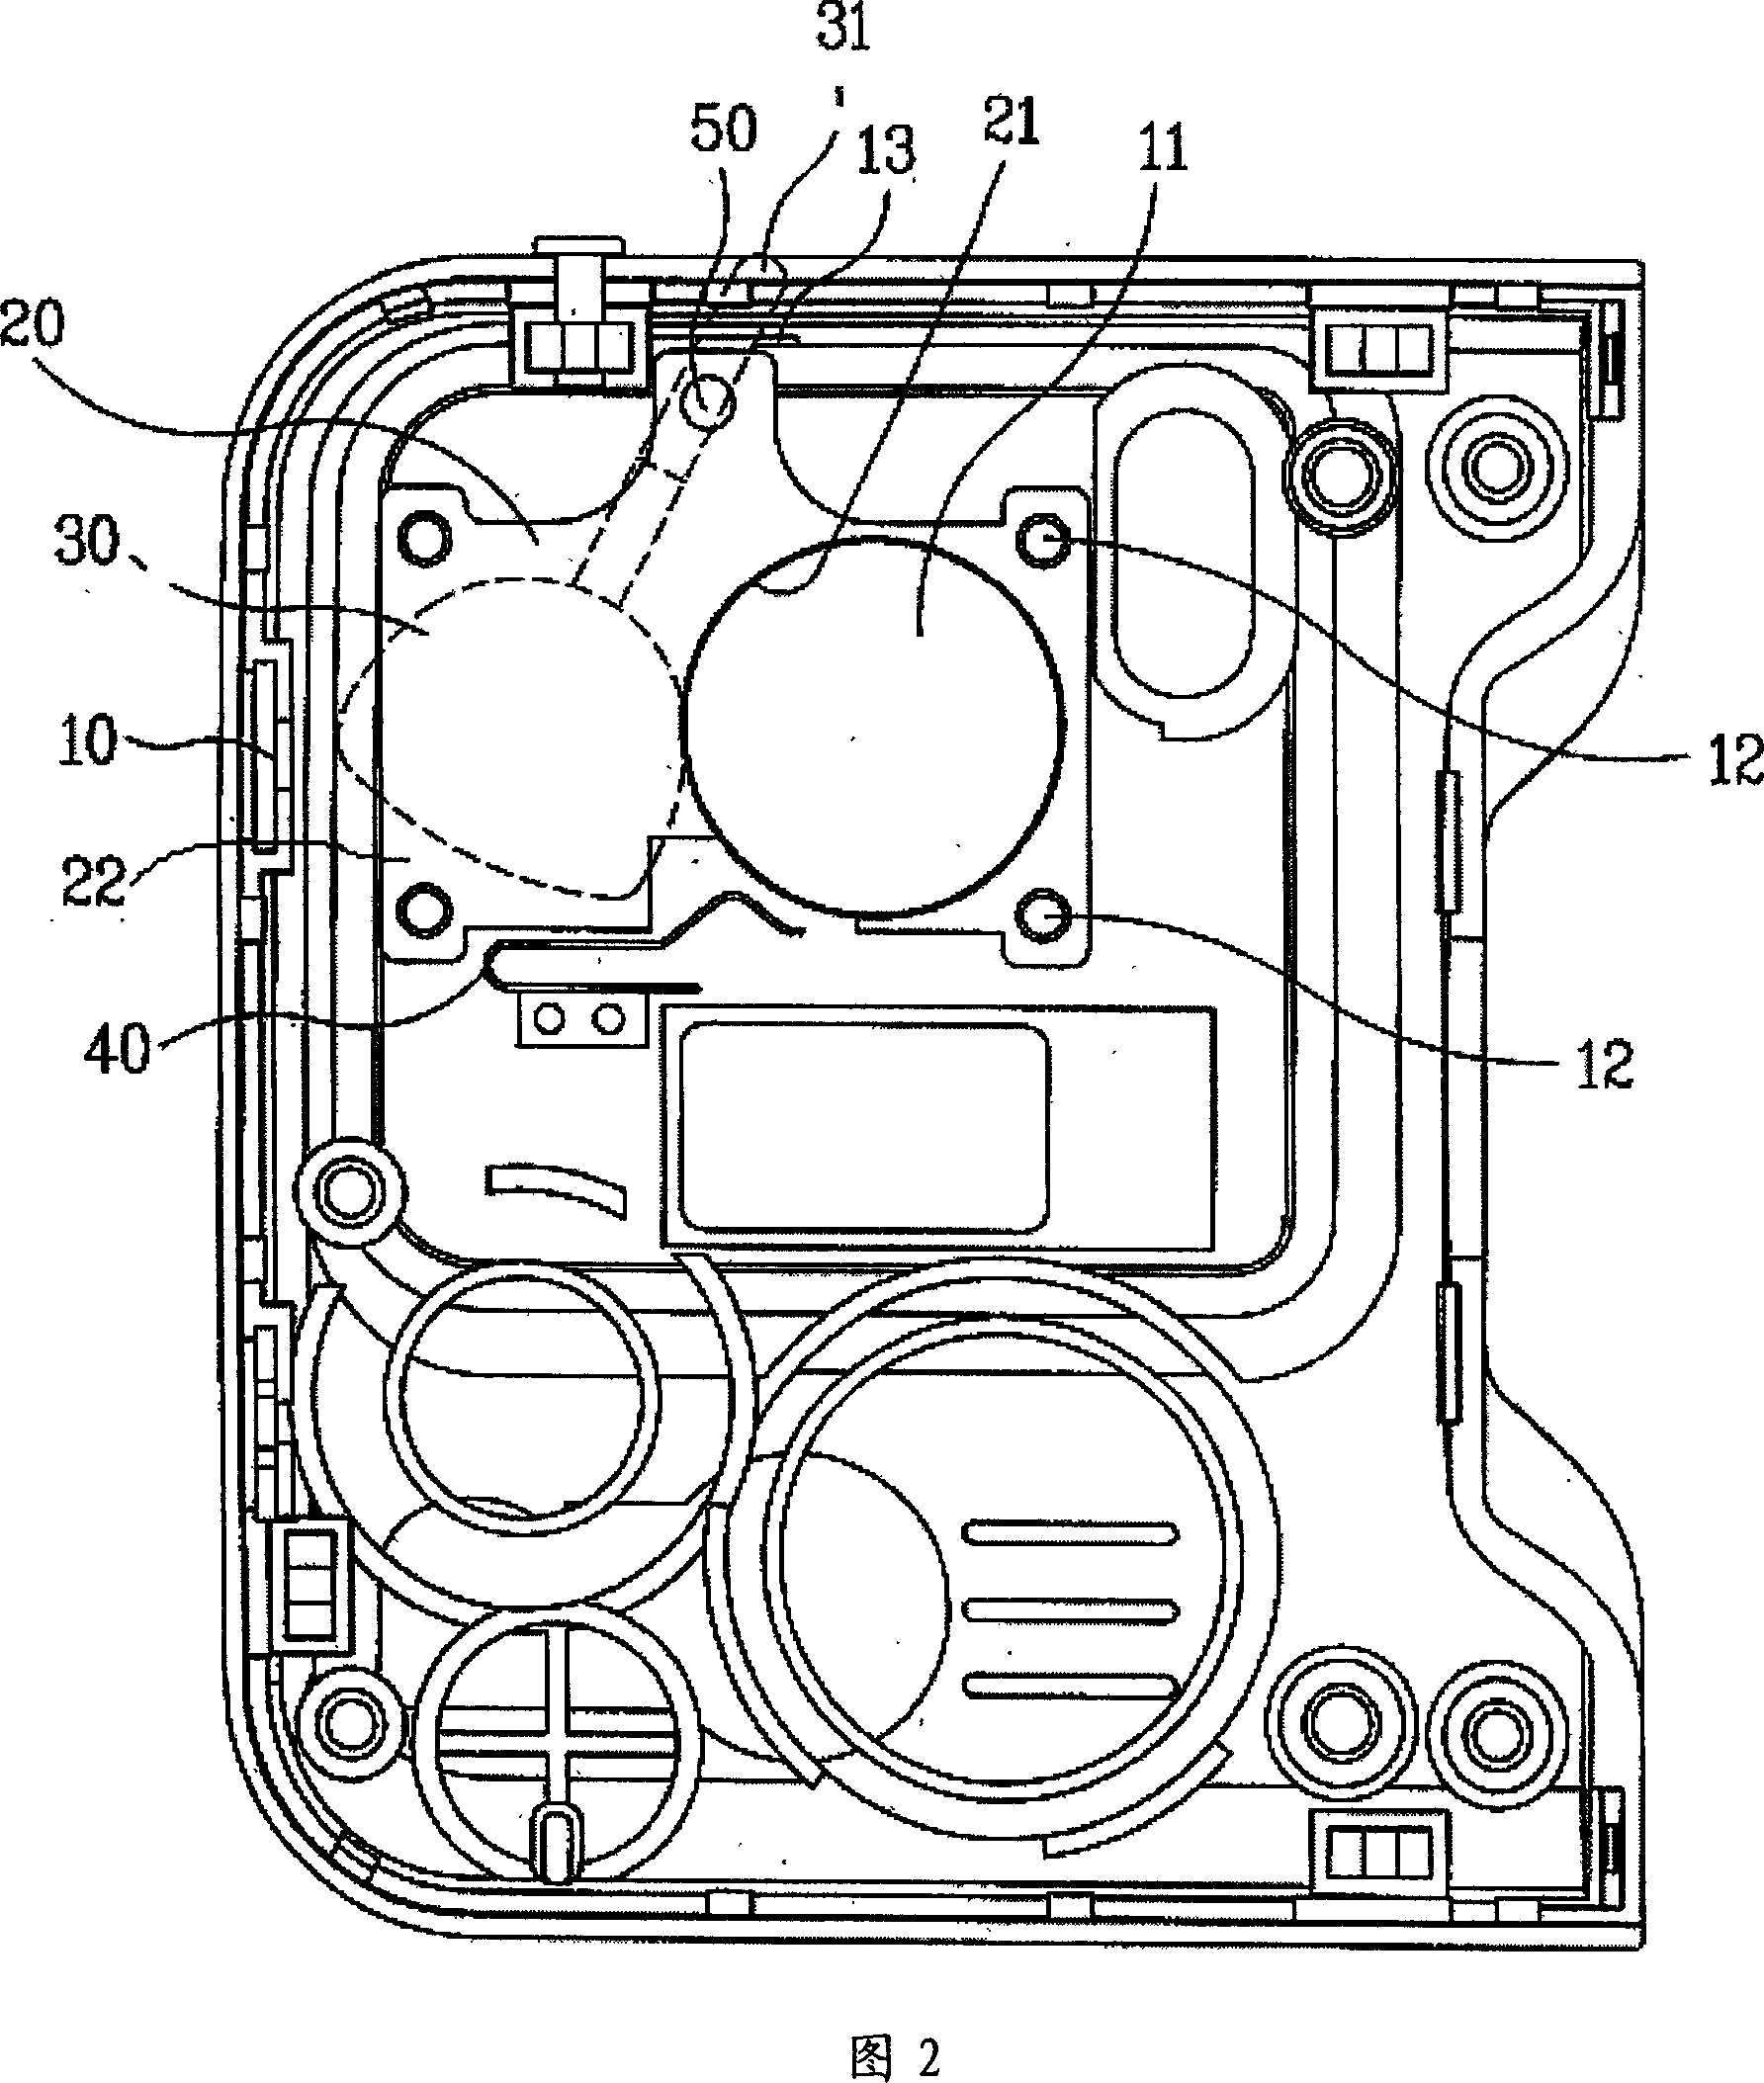 The camera cover apparatus for the mobile communication device